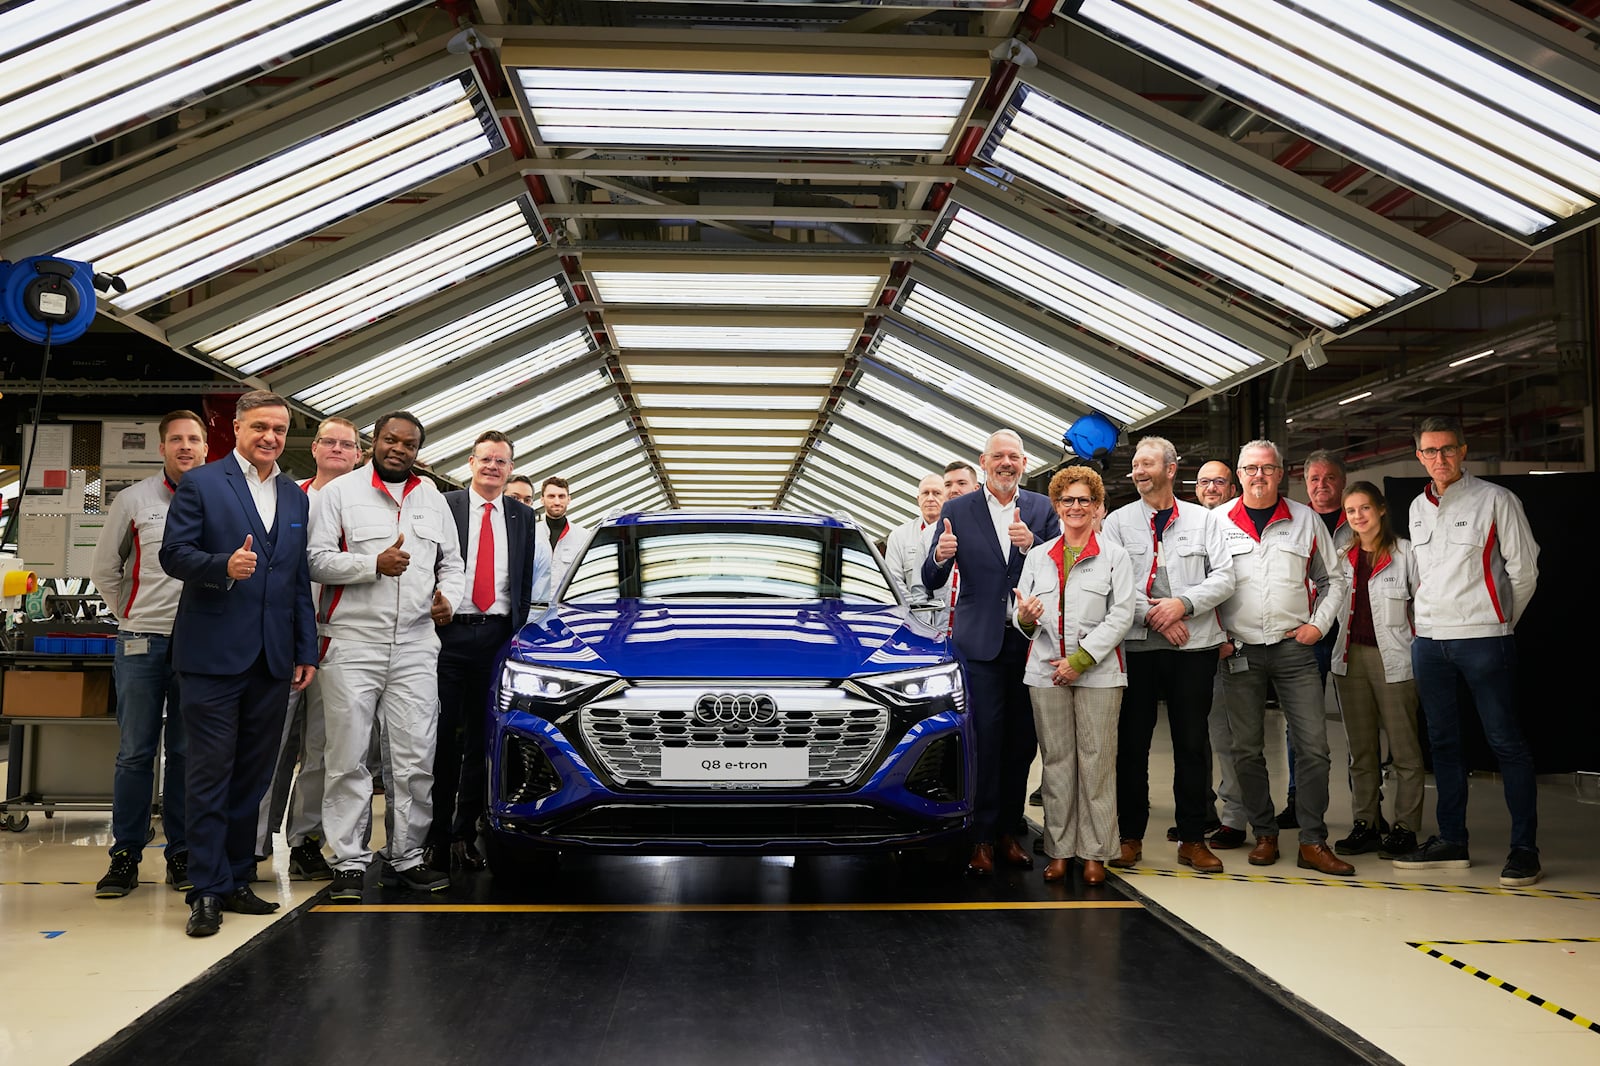 New Audi Q8 e-tron Electric SUV Starts Production In Brussels